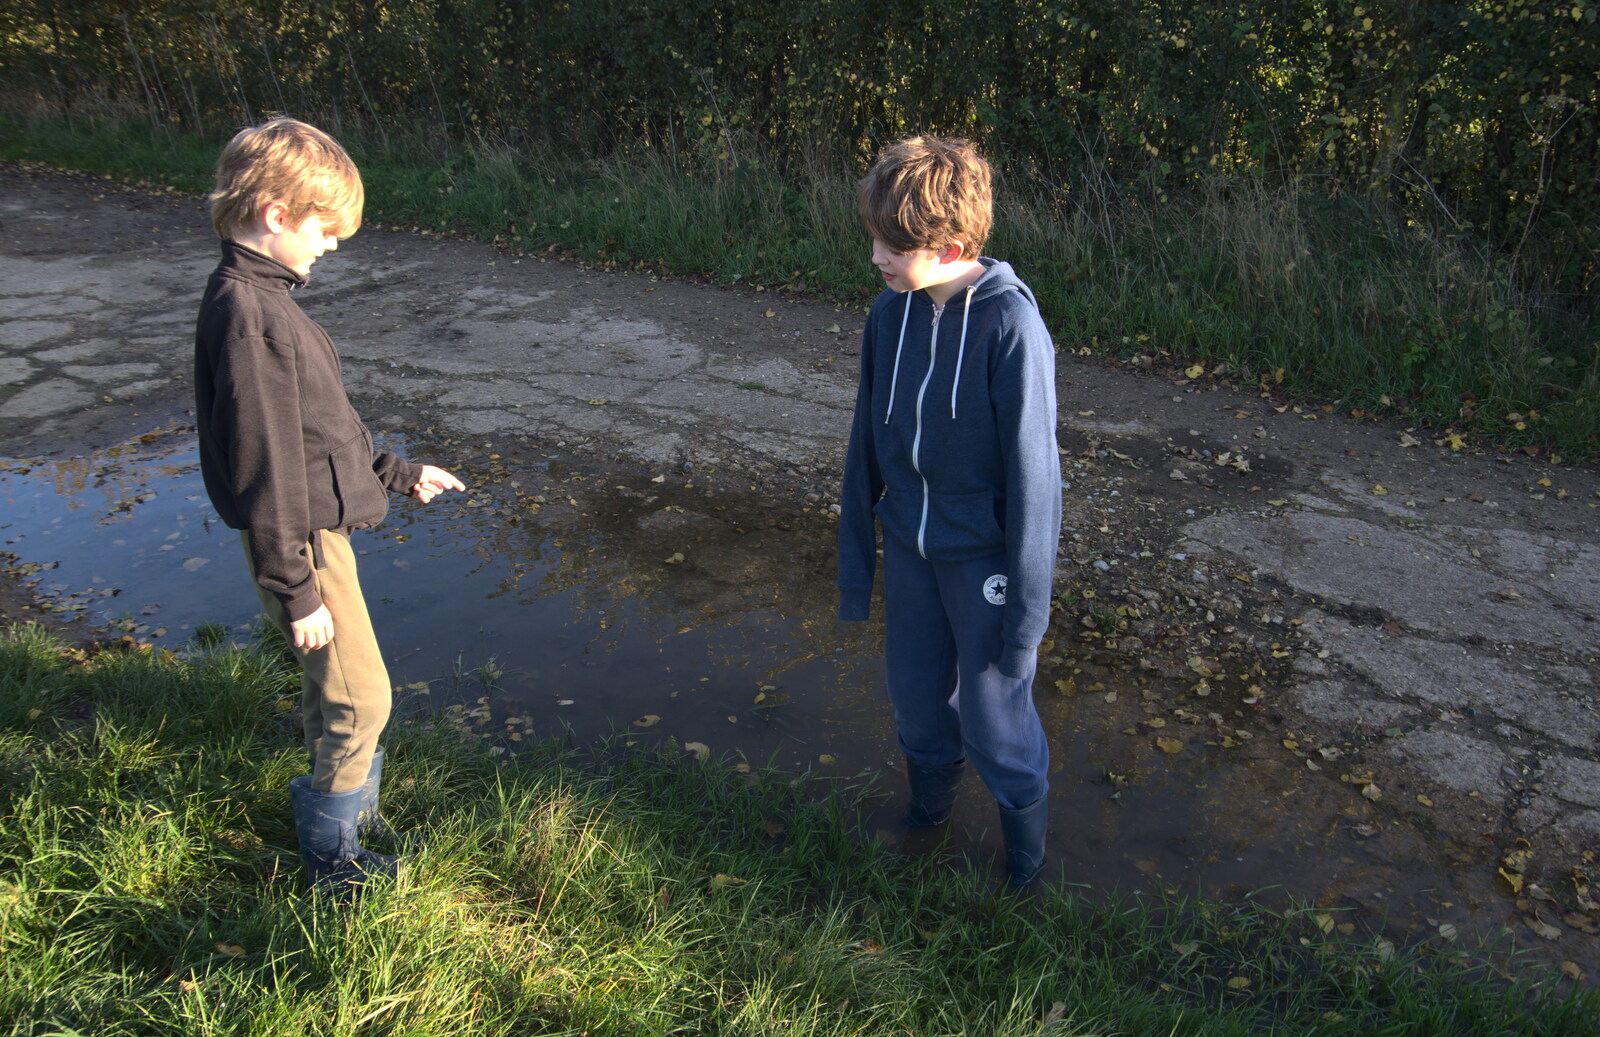 Fred stands in a puddle as Harry points from A Walk Around the Avenue, Brome, Suffolk - 25th October 2020